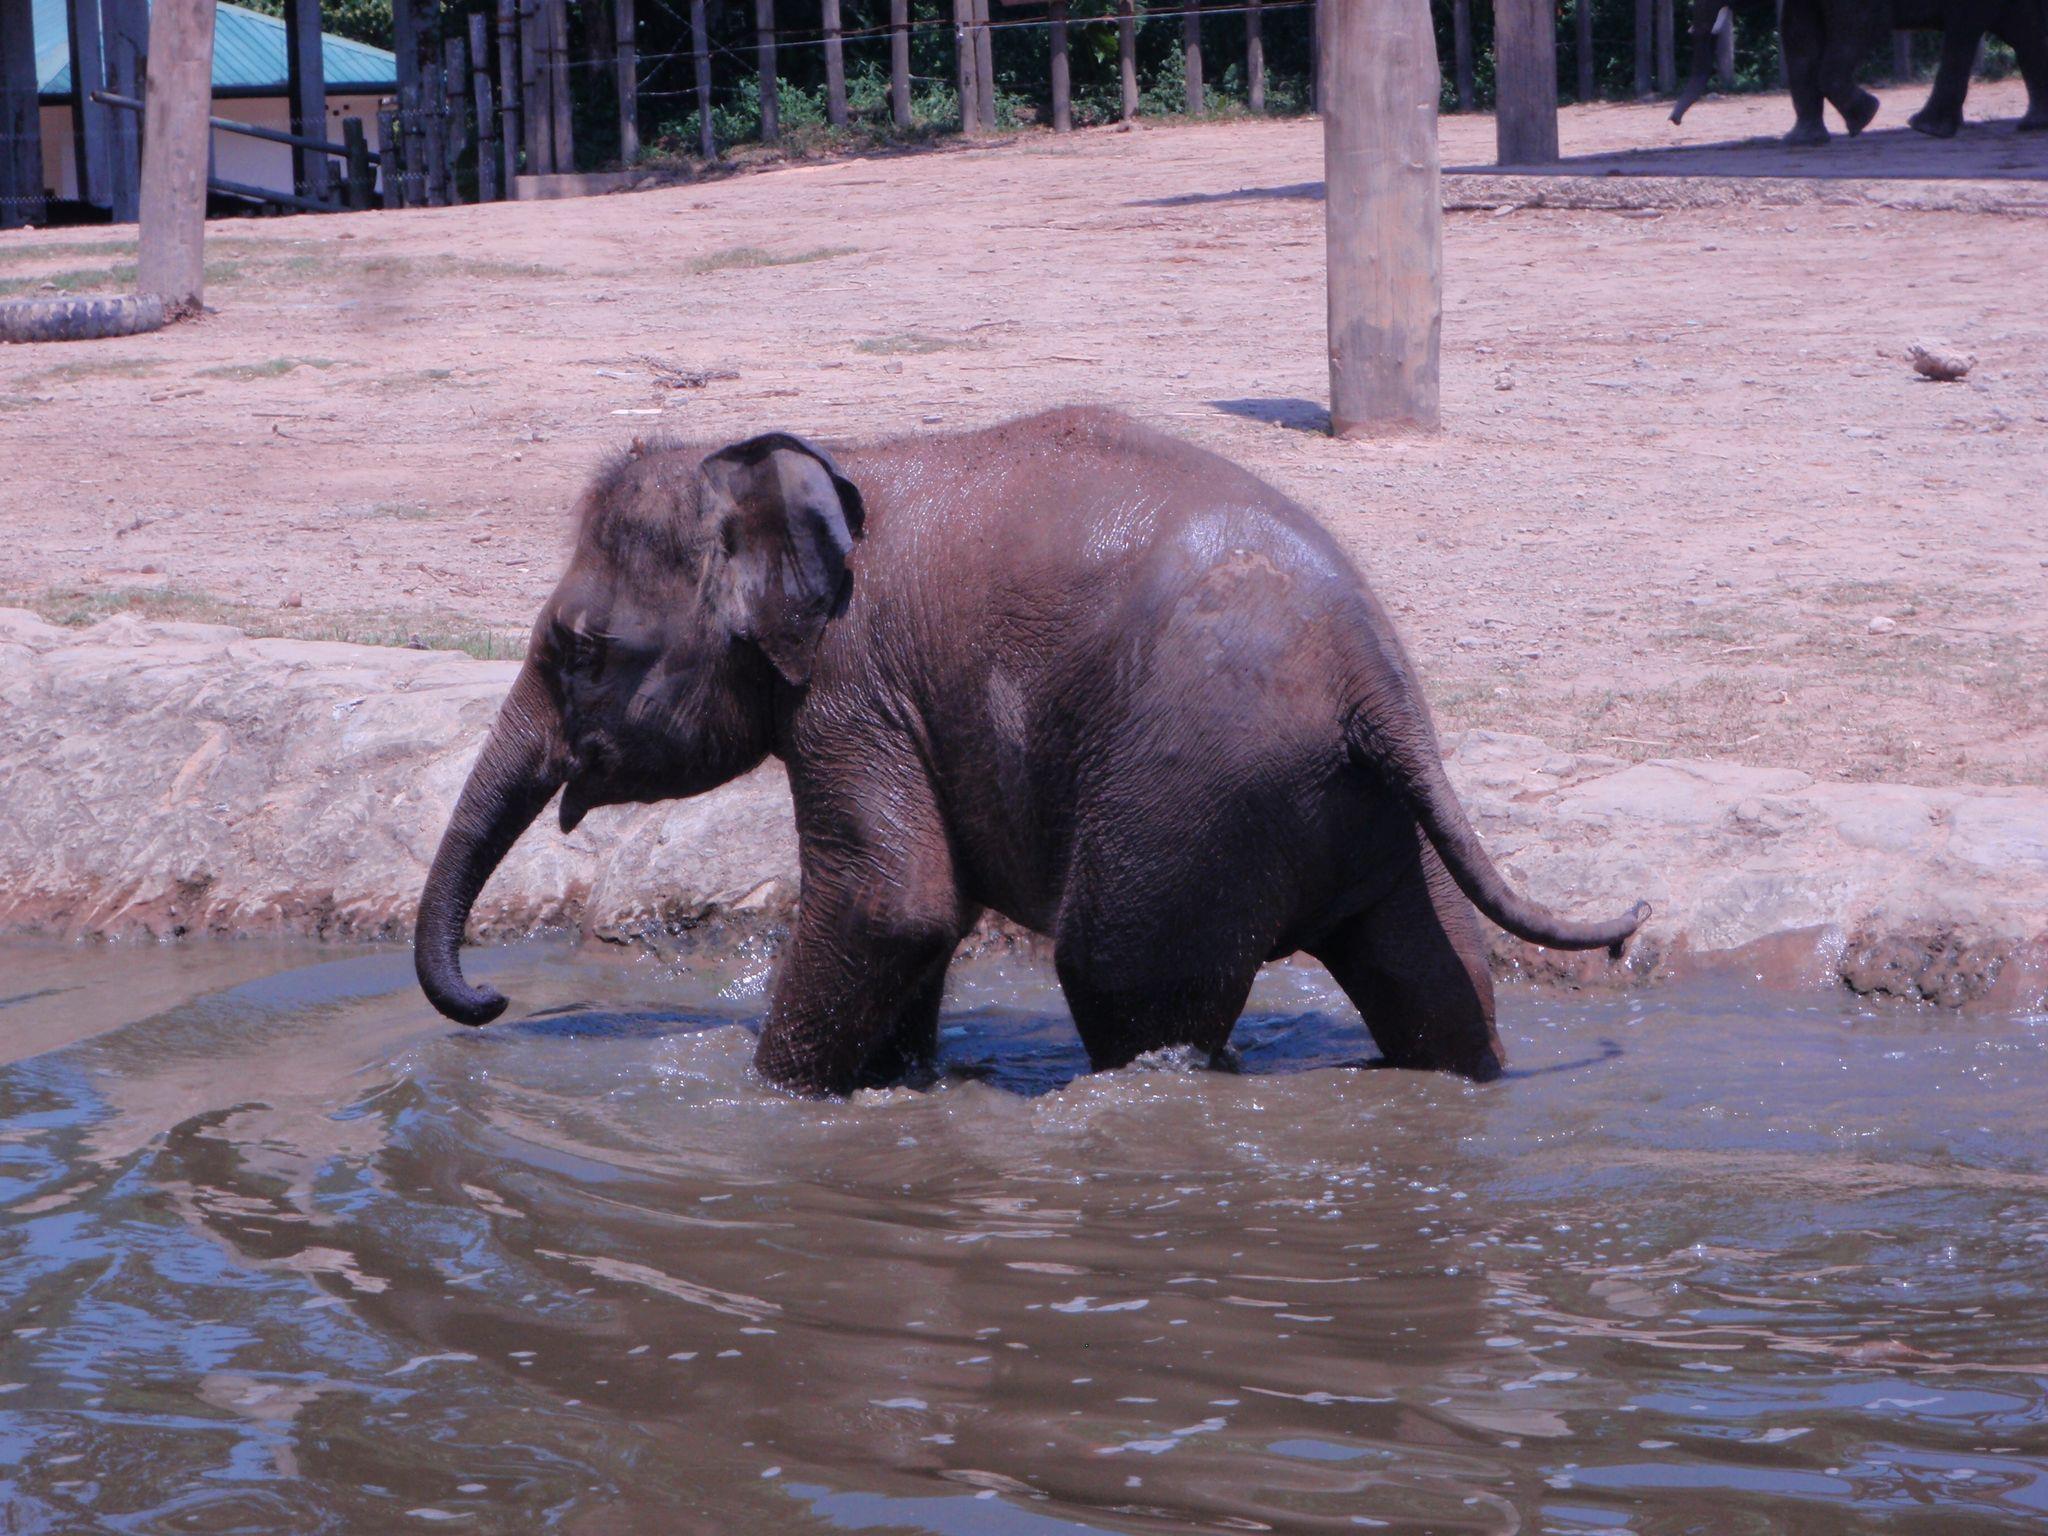 an elephant stands in water by the bank